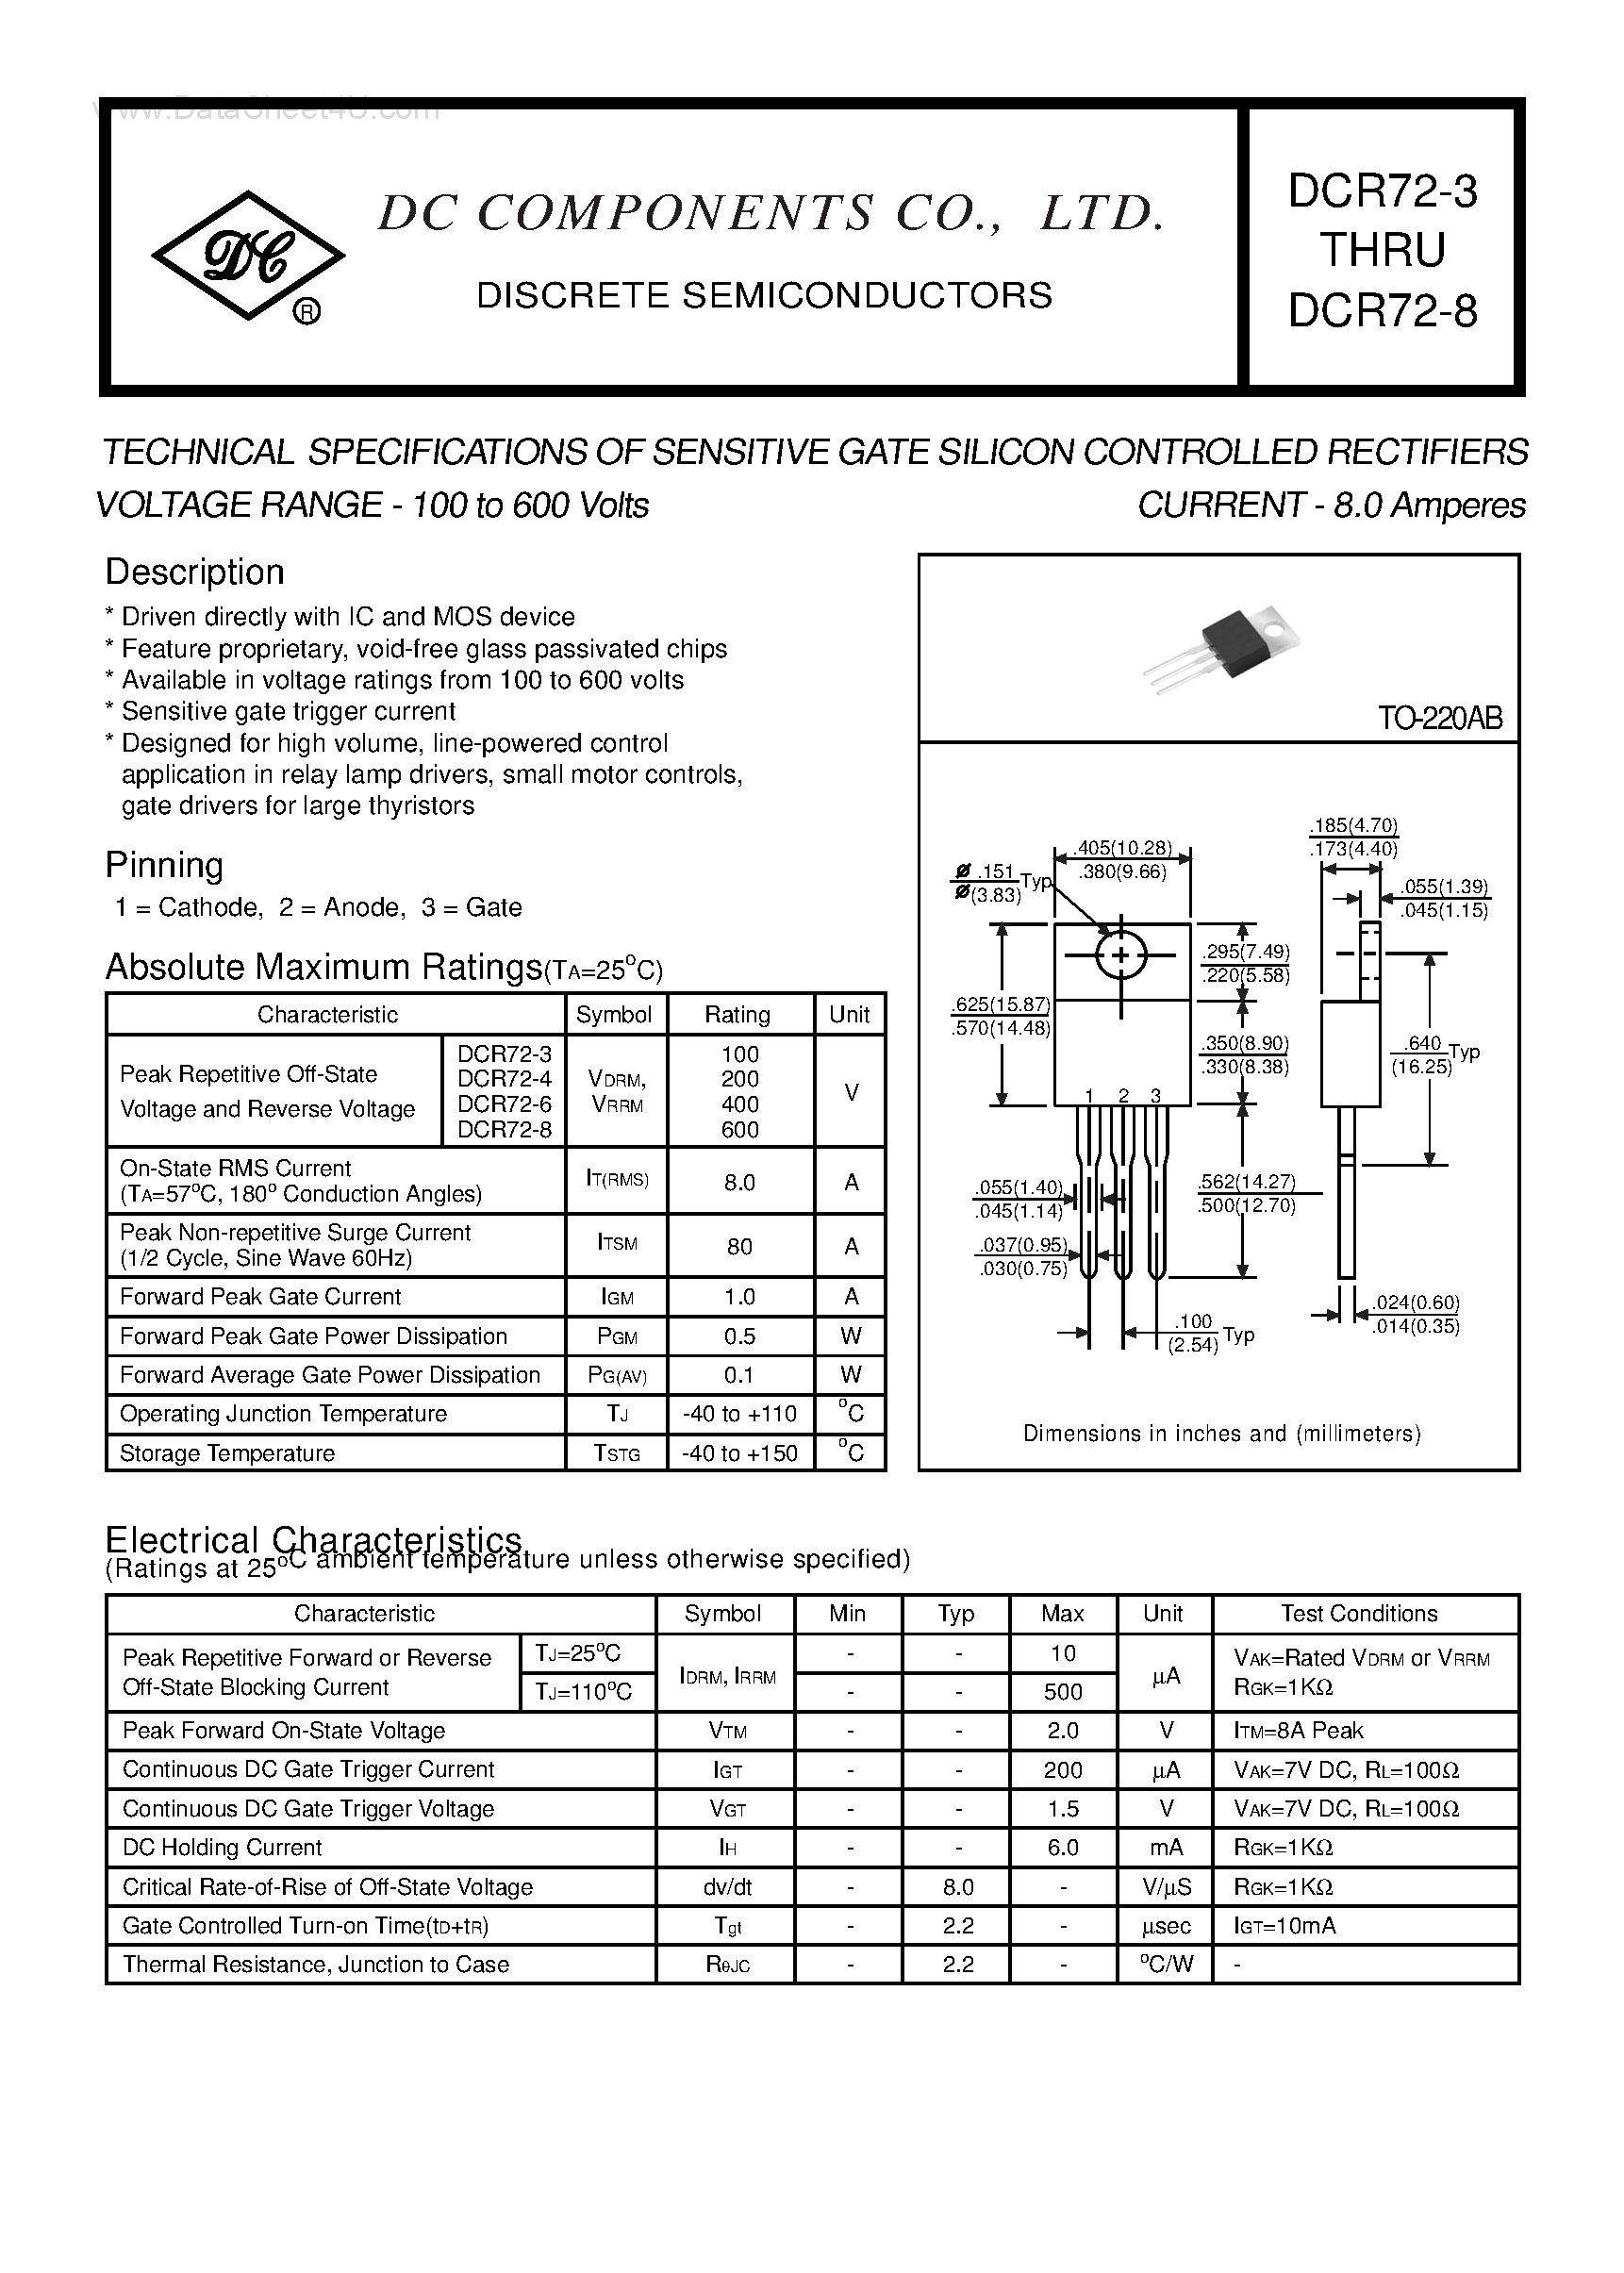 Даташит DCR72-3 - (DCR72-3 - DCR72-8) TECHNICAL SPECIFICATIONS OF SENSITIVE GATE SILICON CONTROLLED RECTIFIERS страница 1